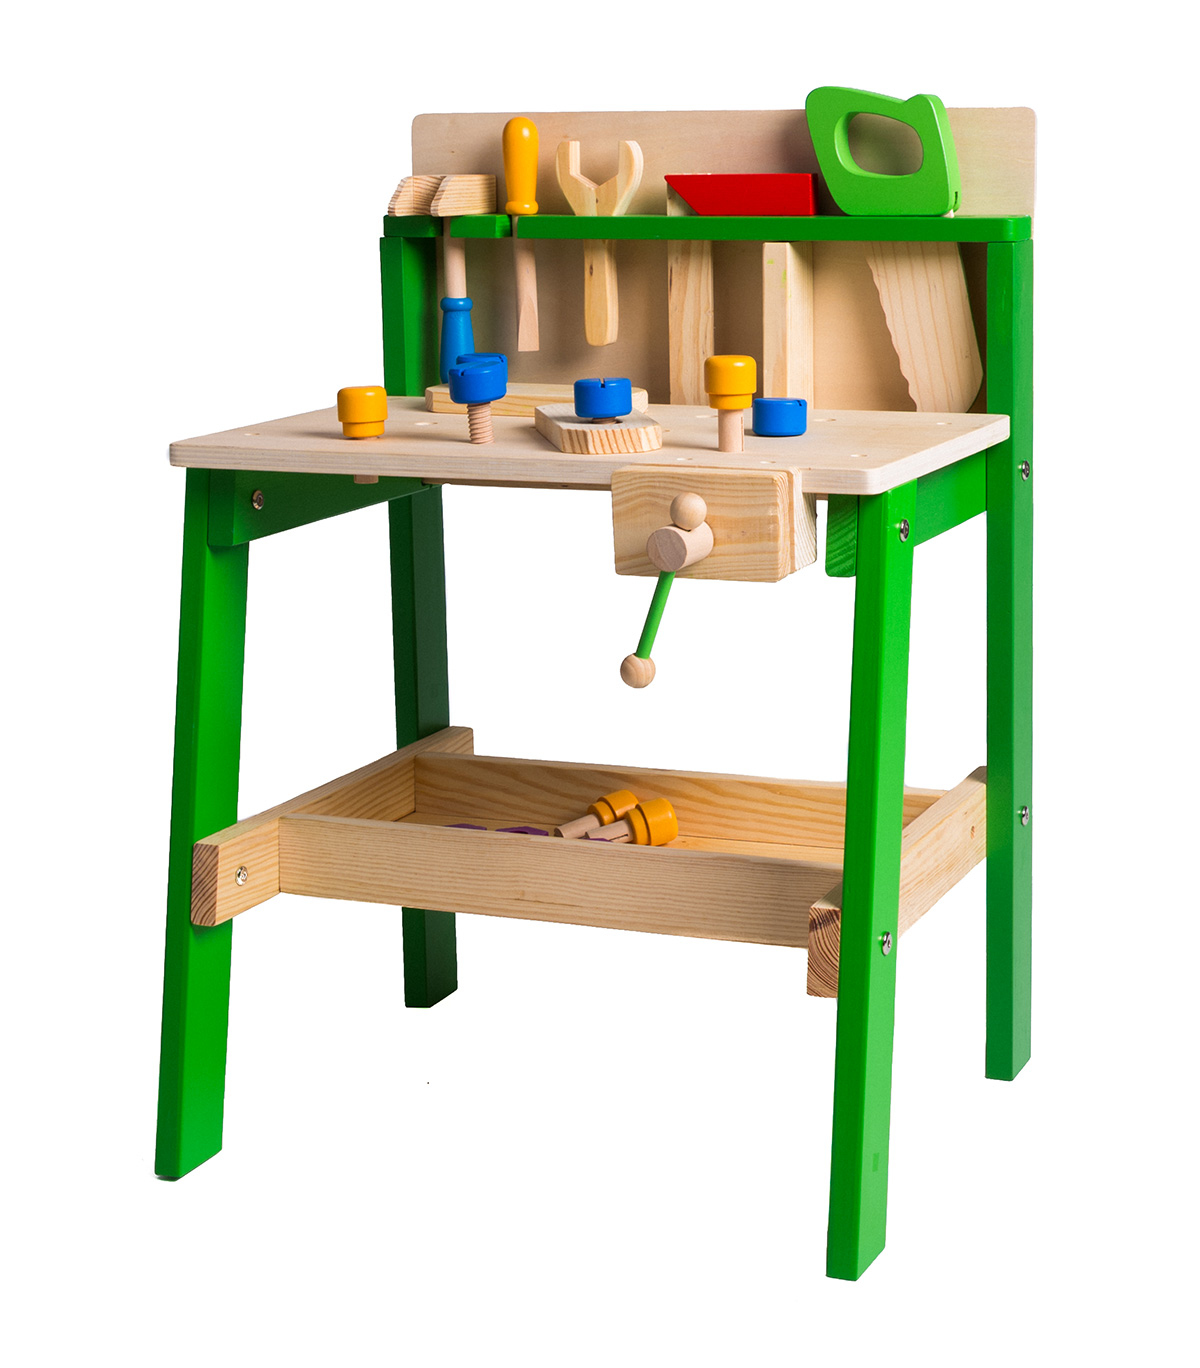 Two-tier solid wooden tool bench complete with 17 accessories